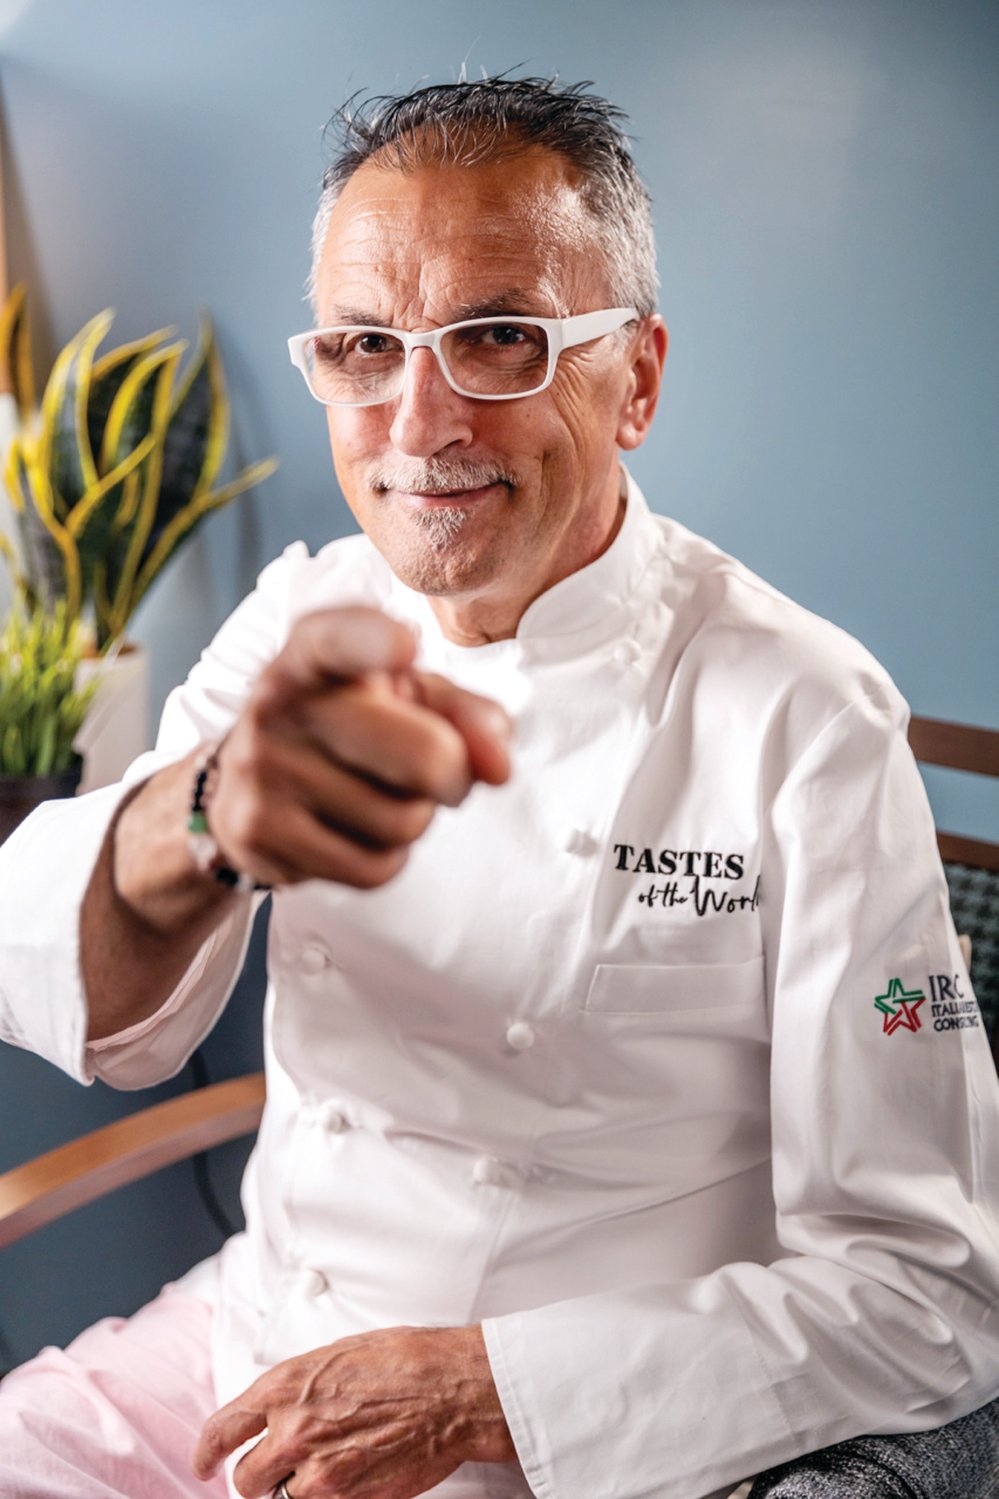 Meet Chef Walter Potenza, local chef and host of “Flavors & Knowledge Tours” of Italy, and beyond! Immerse yourself in the tastes, sights, smells and magic of Italy through the eyes of this talented and world-travelled chef. Call 401-273-2652 to book your tour today!